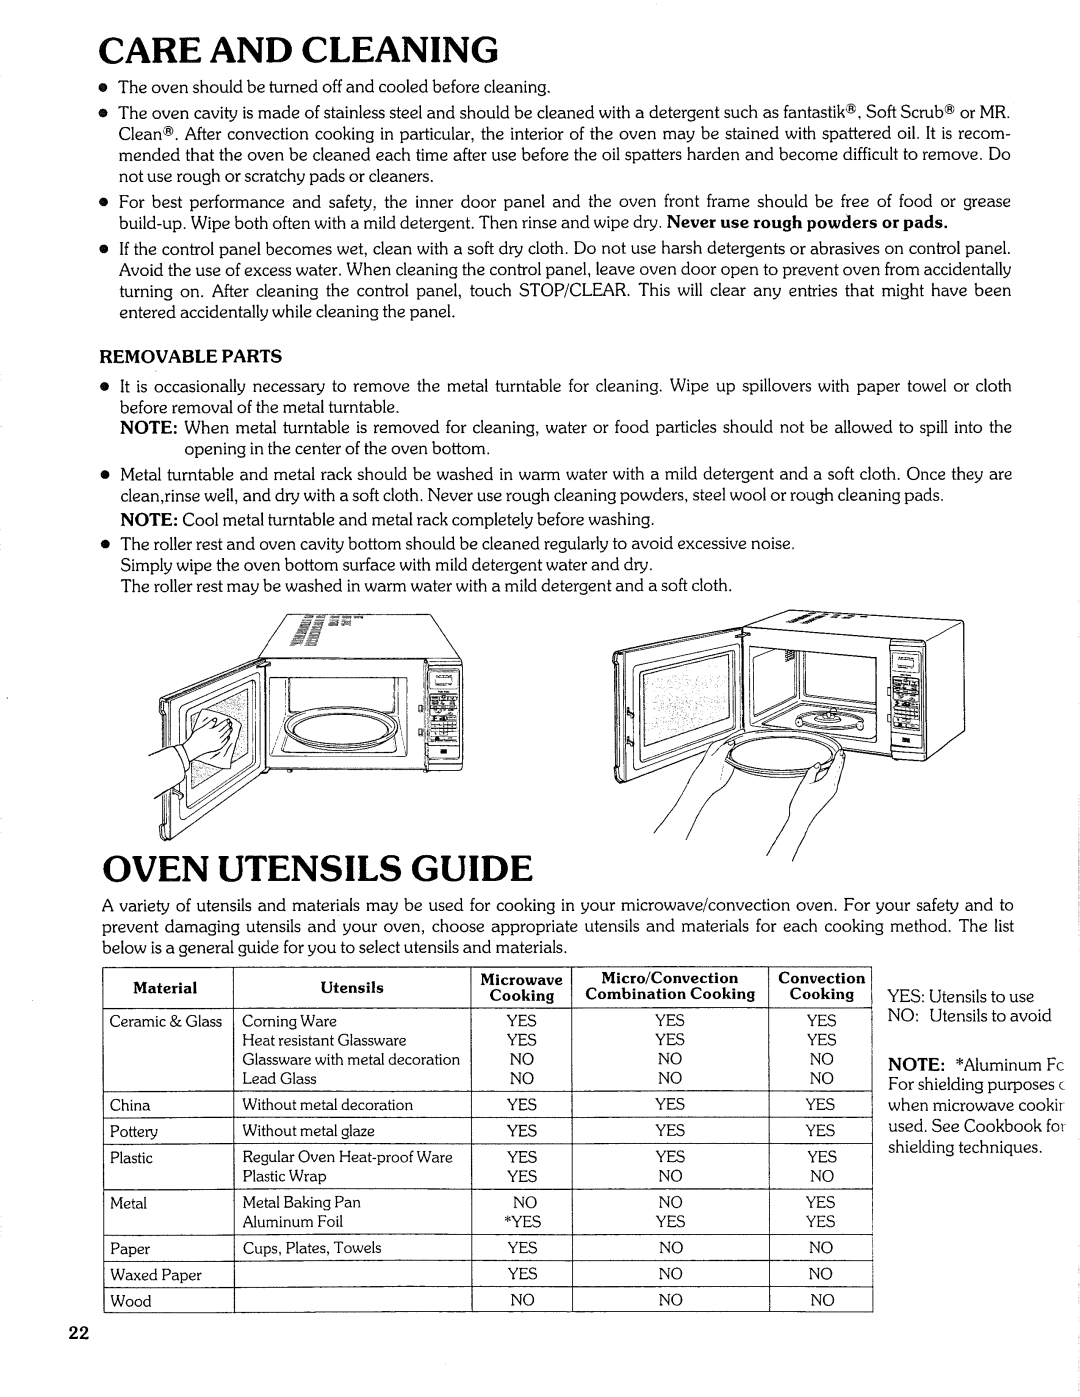 Sears Microwave Oven manual Care And Cleaning, Oven Utensils Guide 